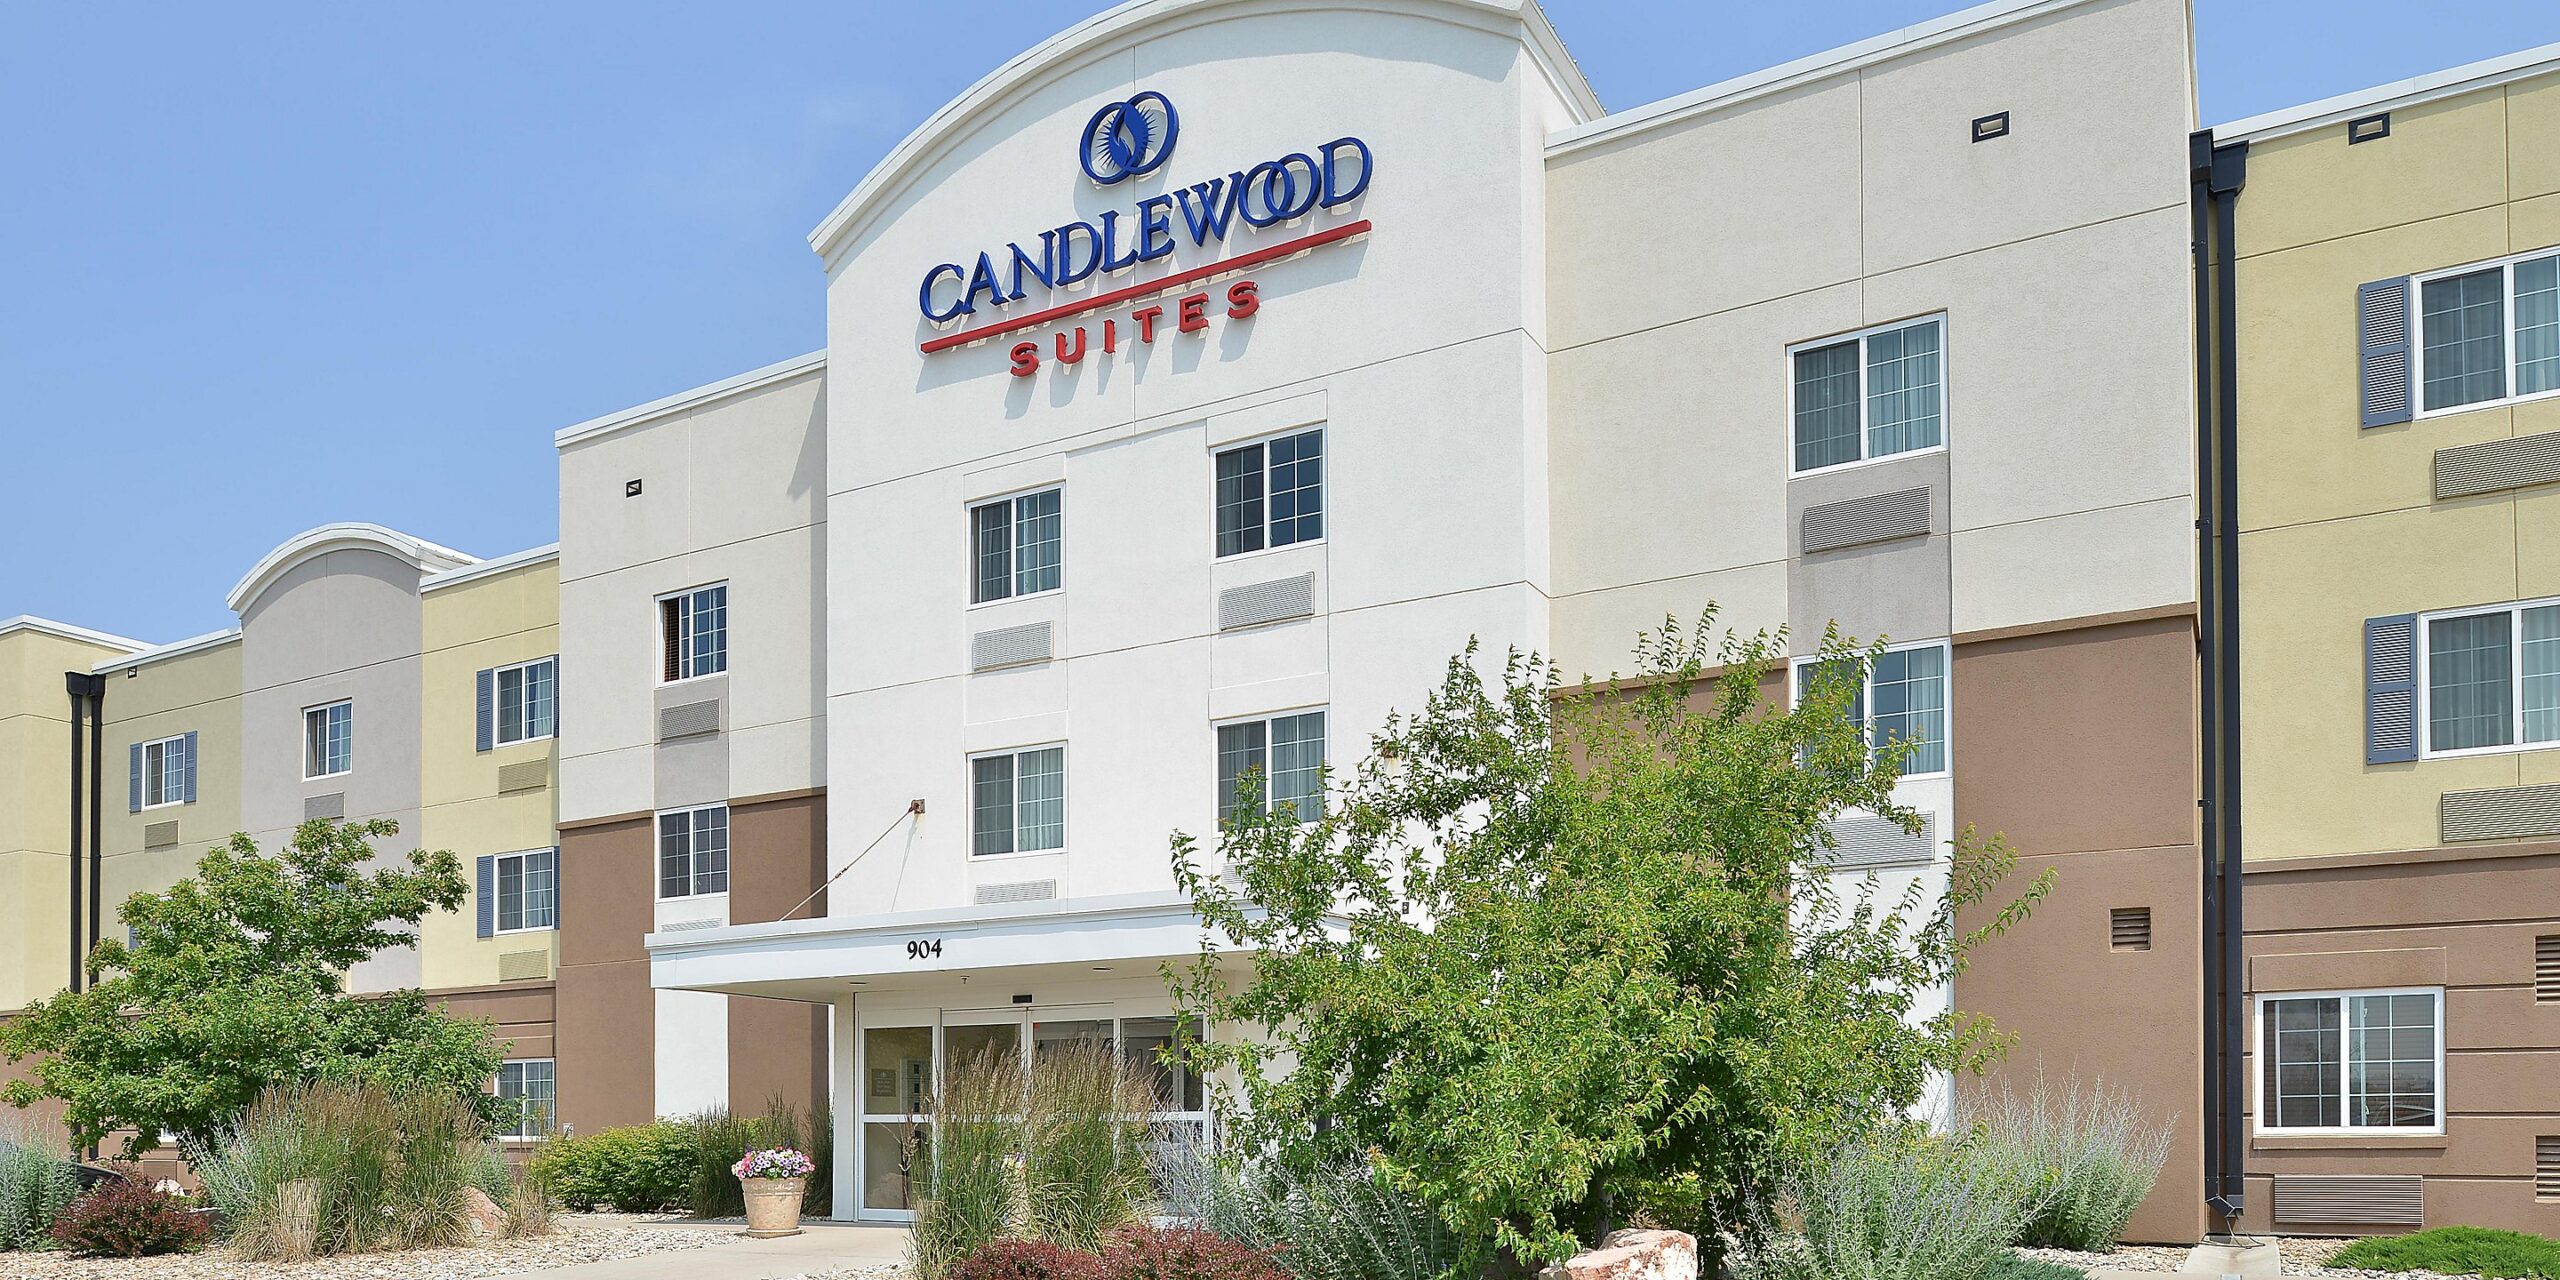 $100 | CANDLEWOOD SUITES CASPER | 3-STAR ACCOMMODATION IN WY